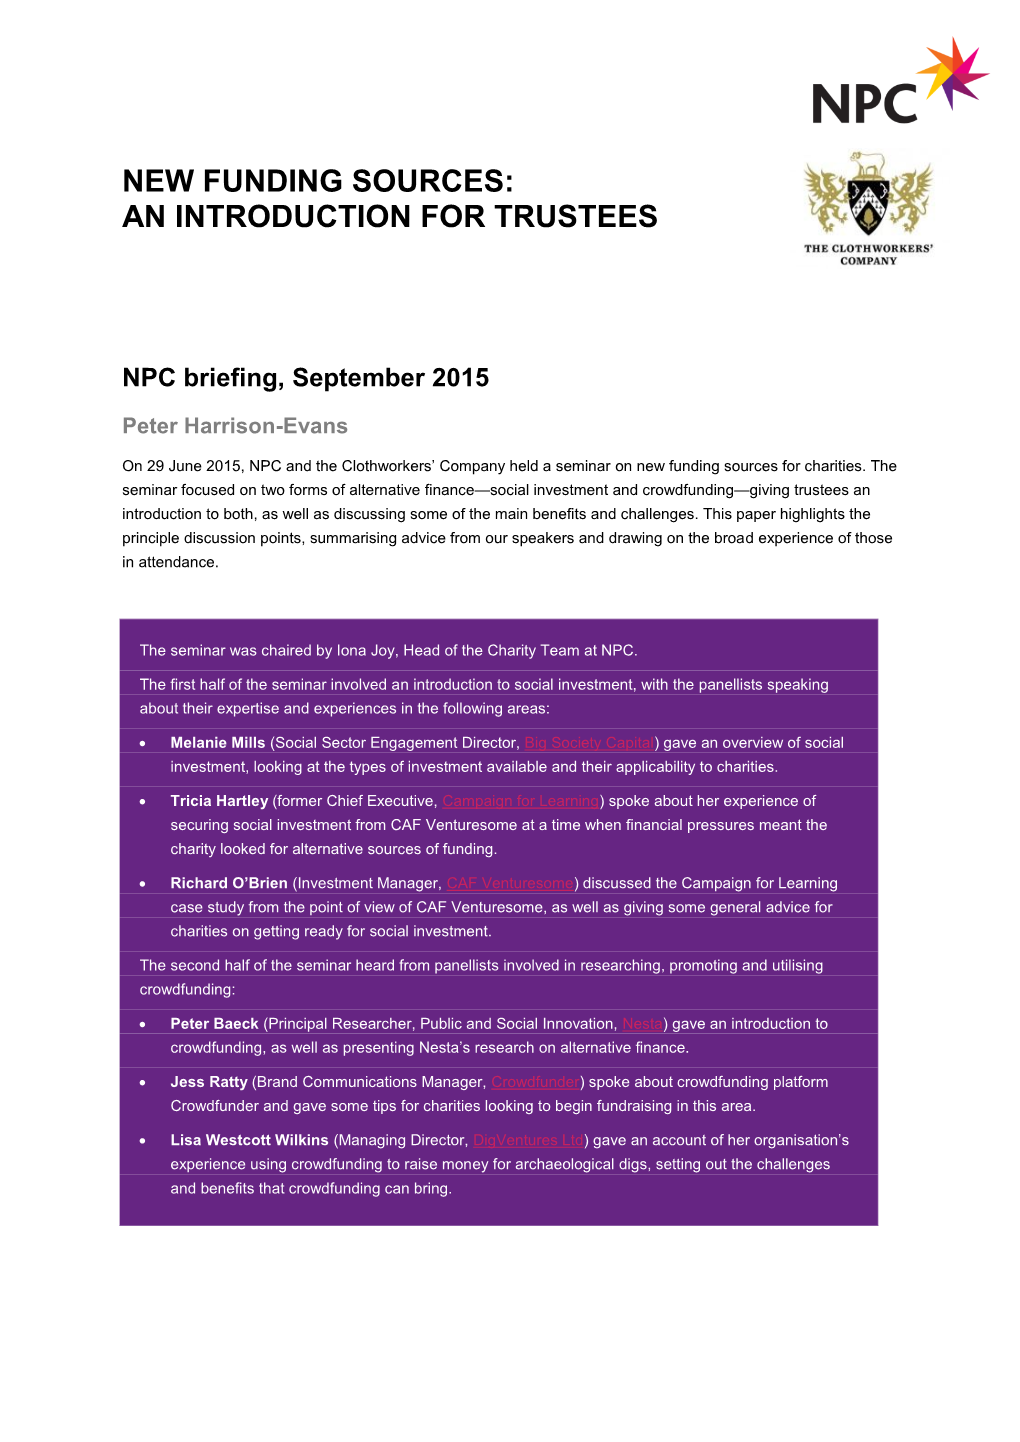 New Funding Sources: an Introduction for Trustees